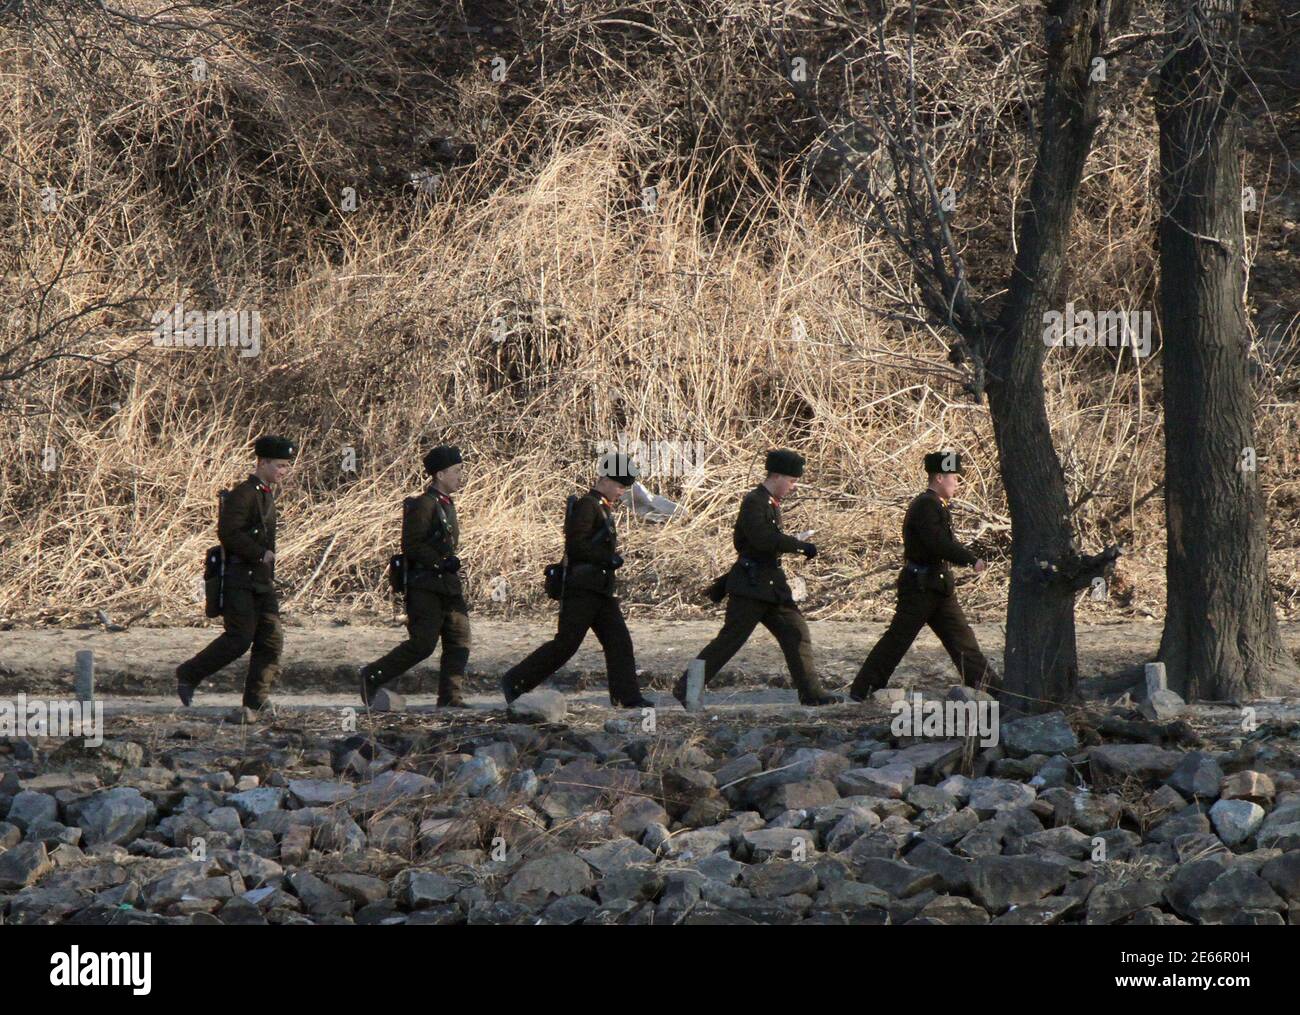 North Korean soldiers patrol along the bank of Yalu River near the North Korean town of Sinuiju, opposite the Chinese border city of Dandong, February 4, 2014. Picture taken February 4, 2014. REUTERS/Jacky Chen (NORTH KOREA - Tags: MILITARY POLITICS) Stock Photo